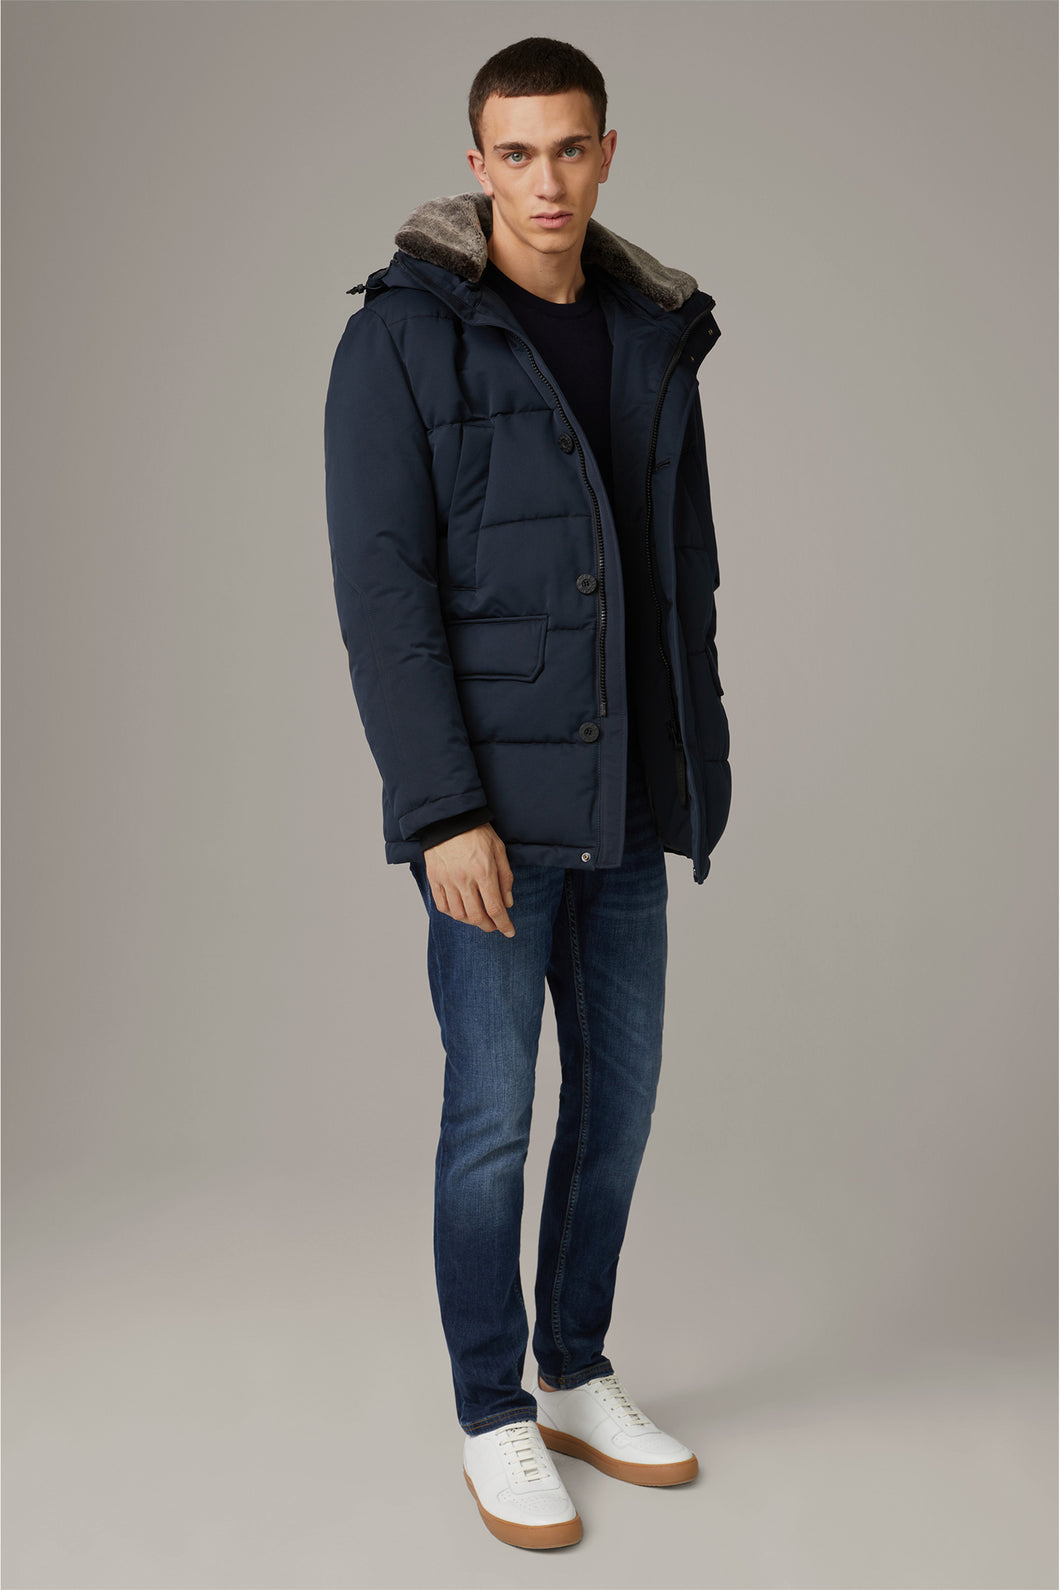 Strellson - Plaza Quilted Jacket, Navy